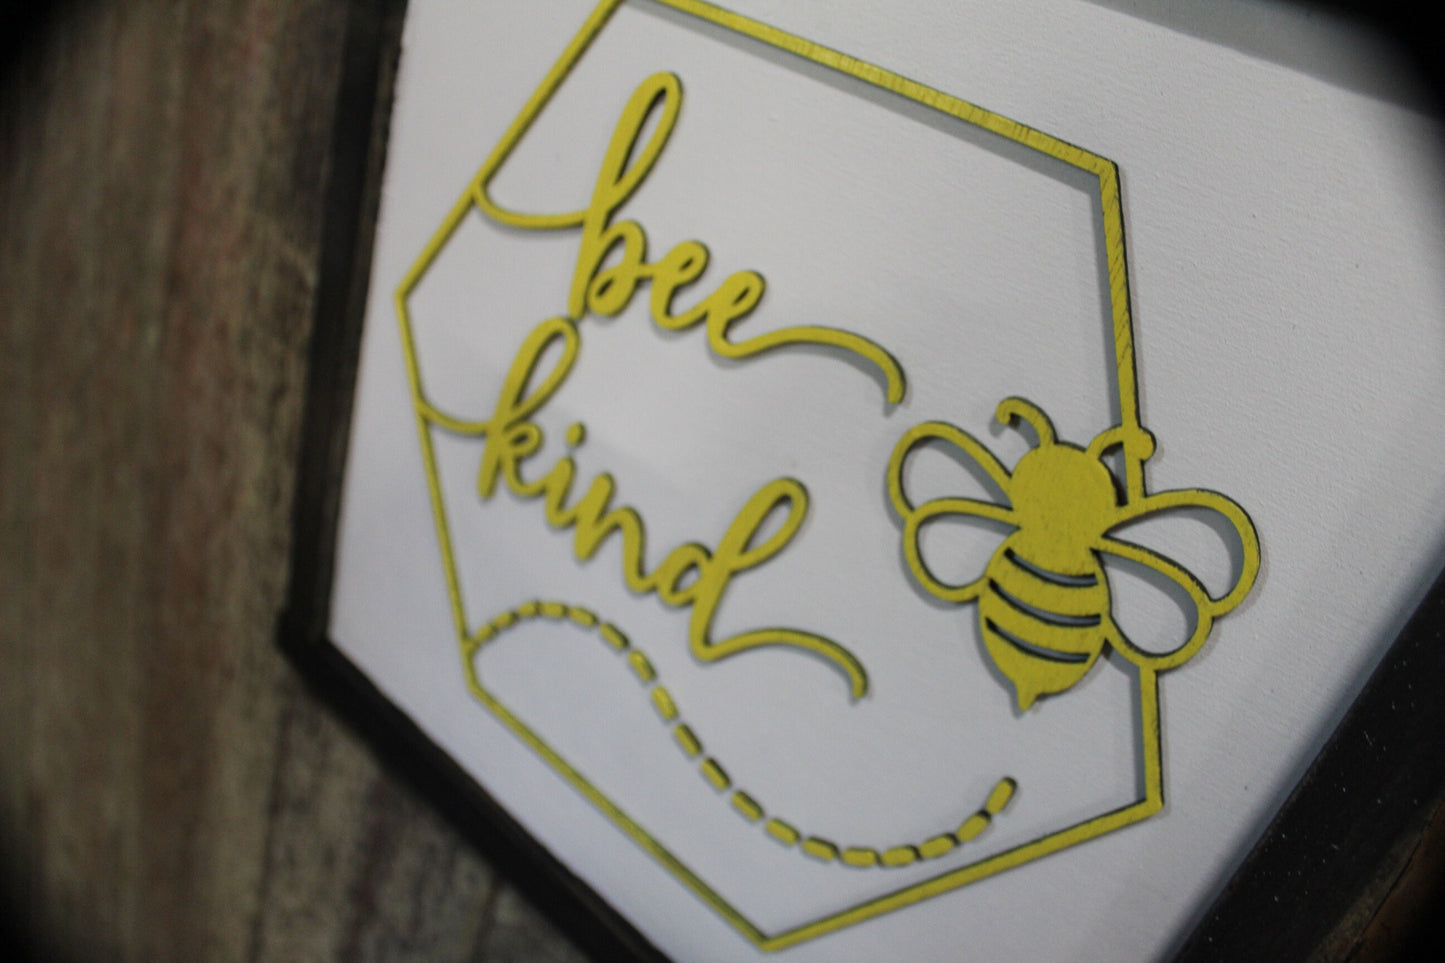 Bee Kind Wood Sign Honey Comb Queen Bee 3D Raised Text Bumble Bee Wreath Rustic Honey Bee Hive Farmhouse Country Yellow Wall Hanging Art